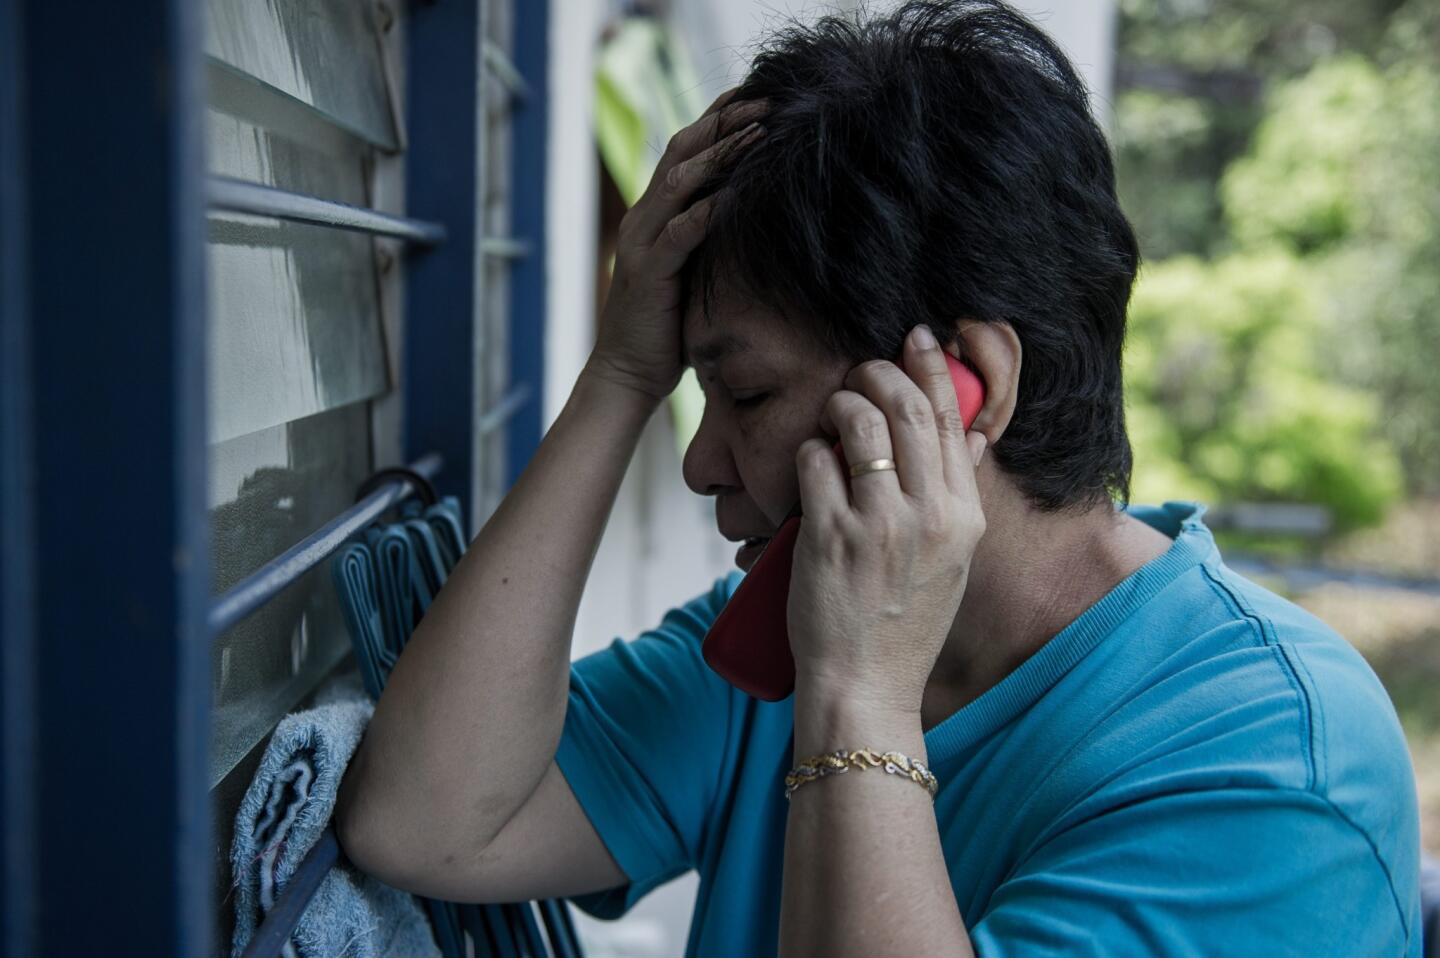 Sarah Nor, 55, the mother of 34-year-old Norliakmar Hamid, a passenger on a missing Malaysia Airlines Boeing 777-200 plane, talks on a mobile phone at her house in Kuala Lumpur.